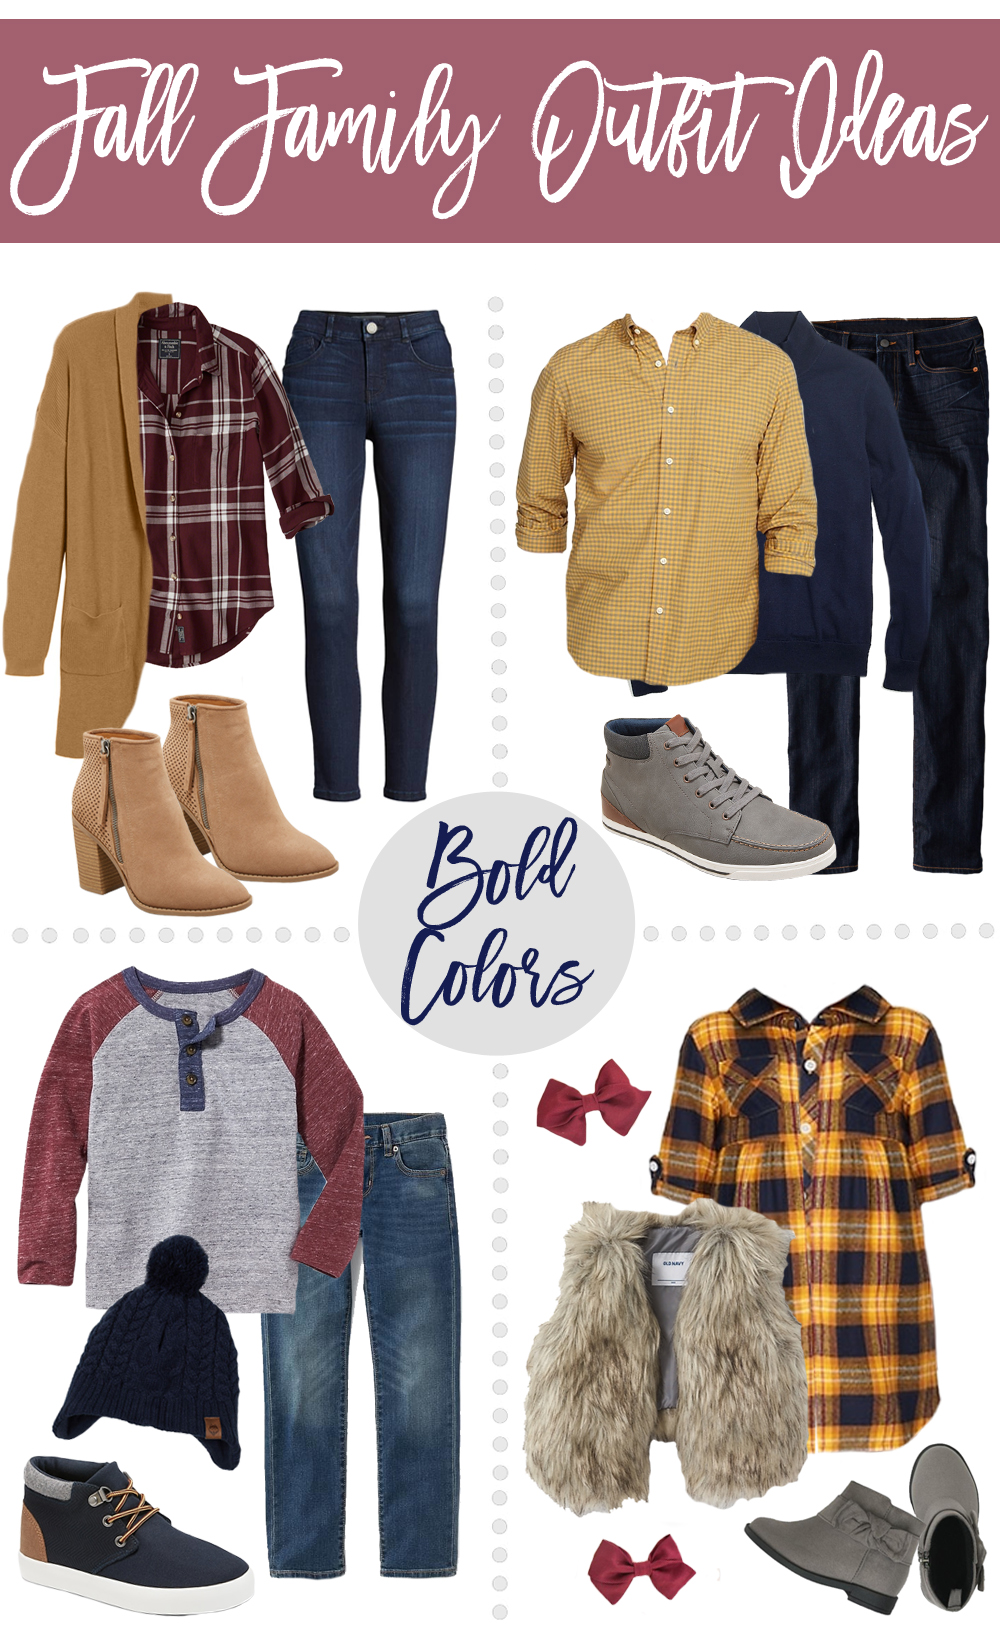 fall-family-outfit-ideas-bold-color-neutral-color-options